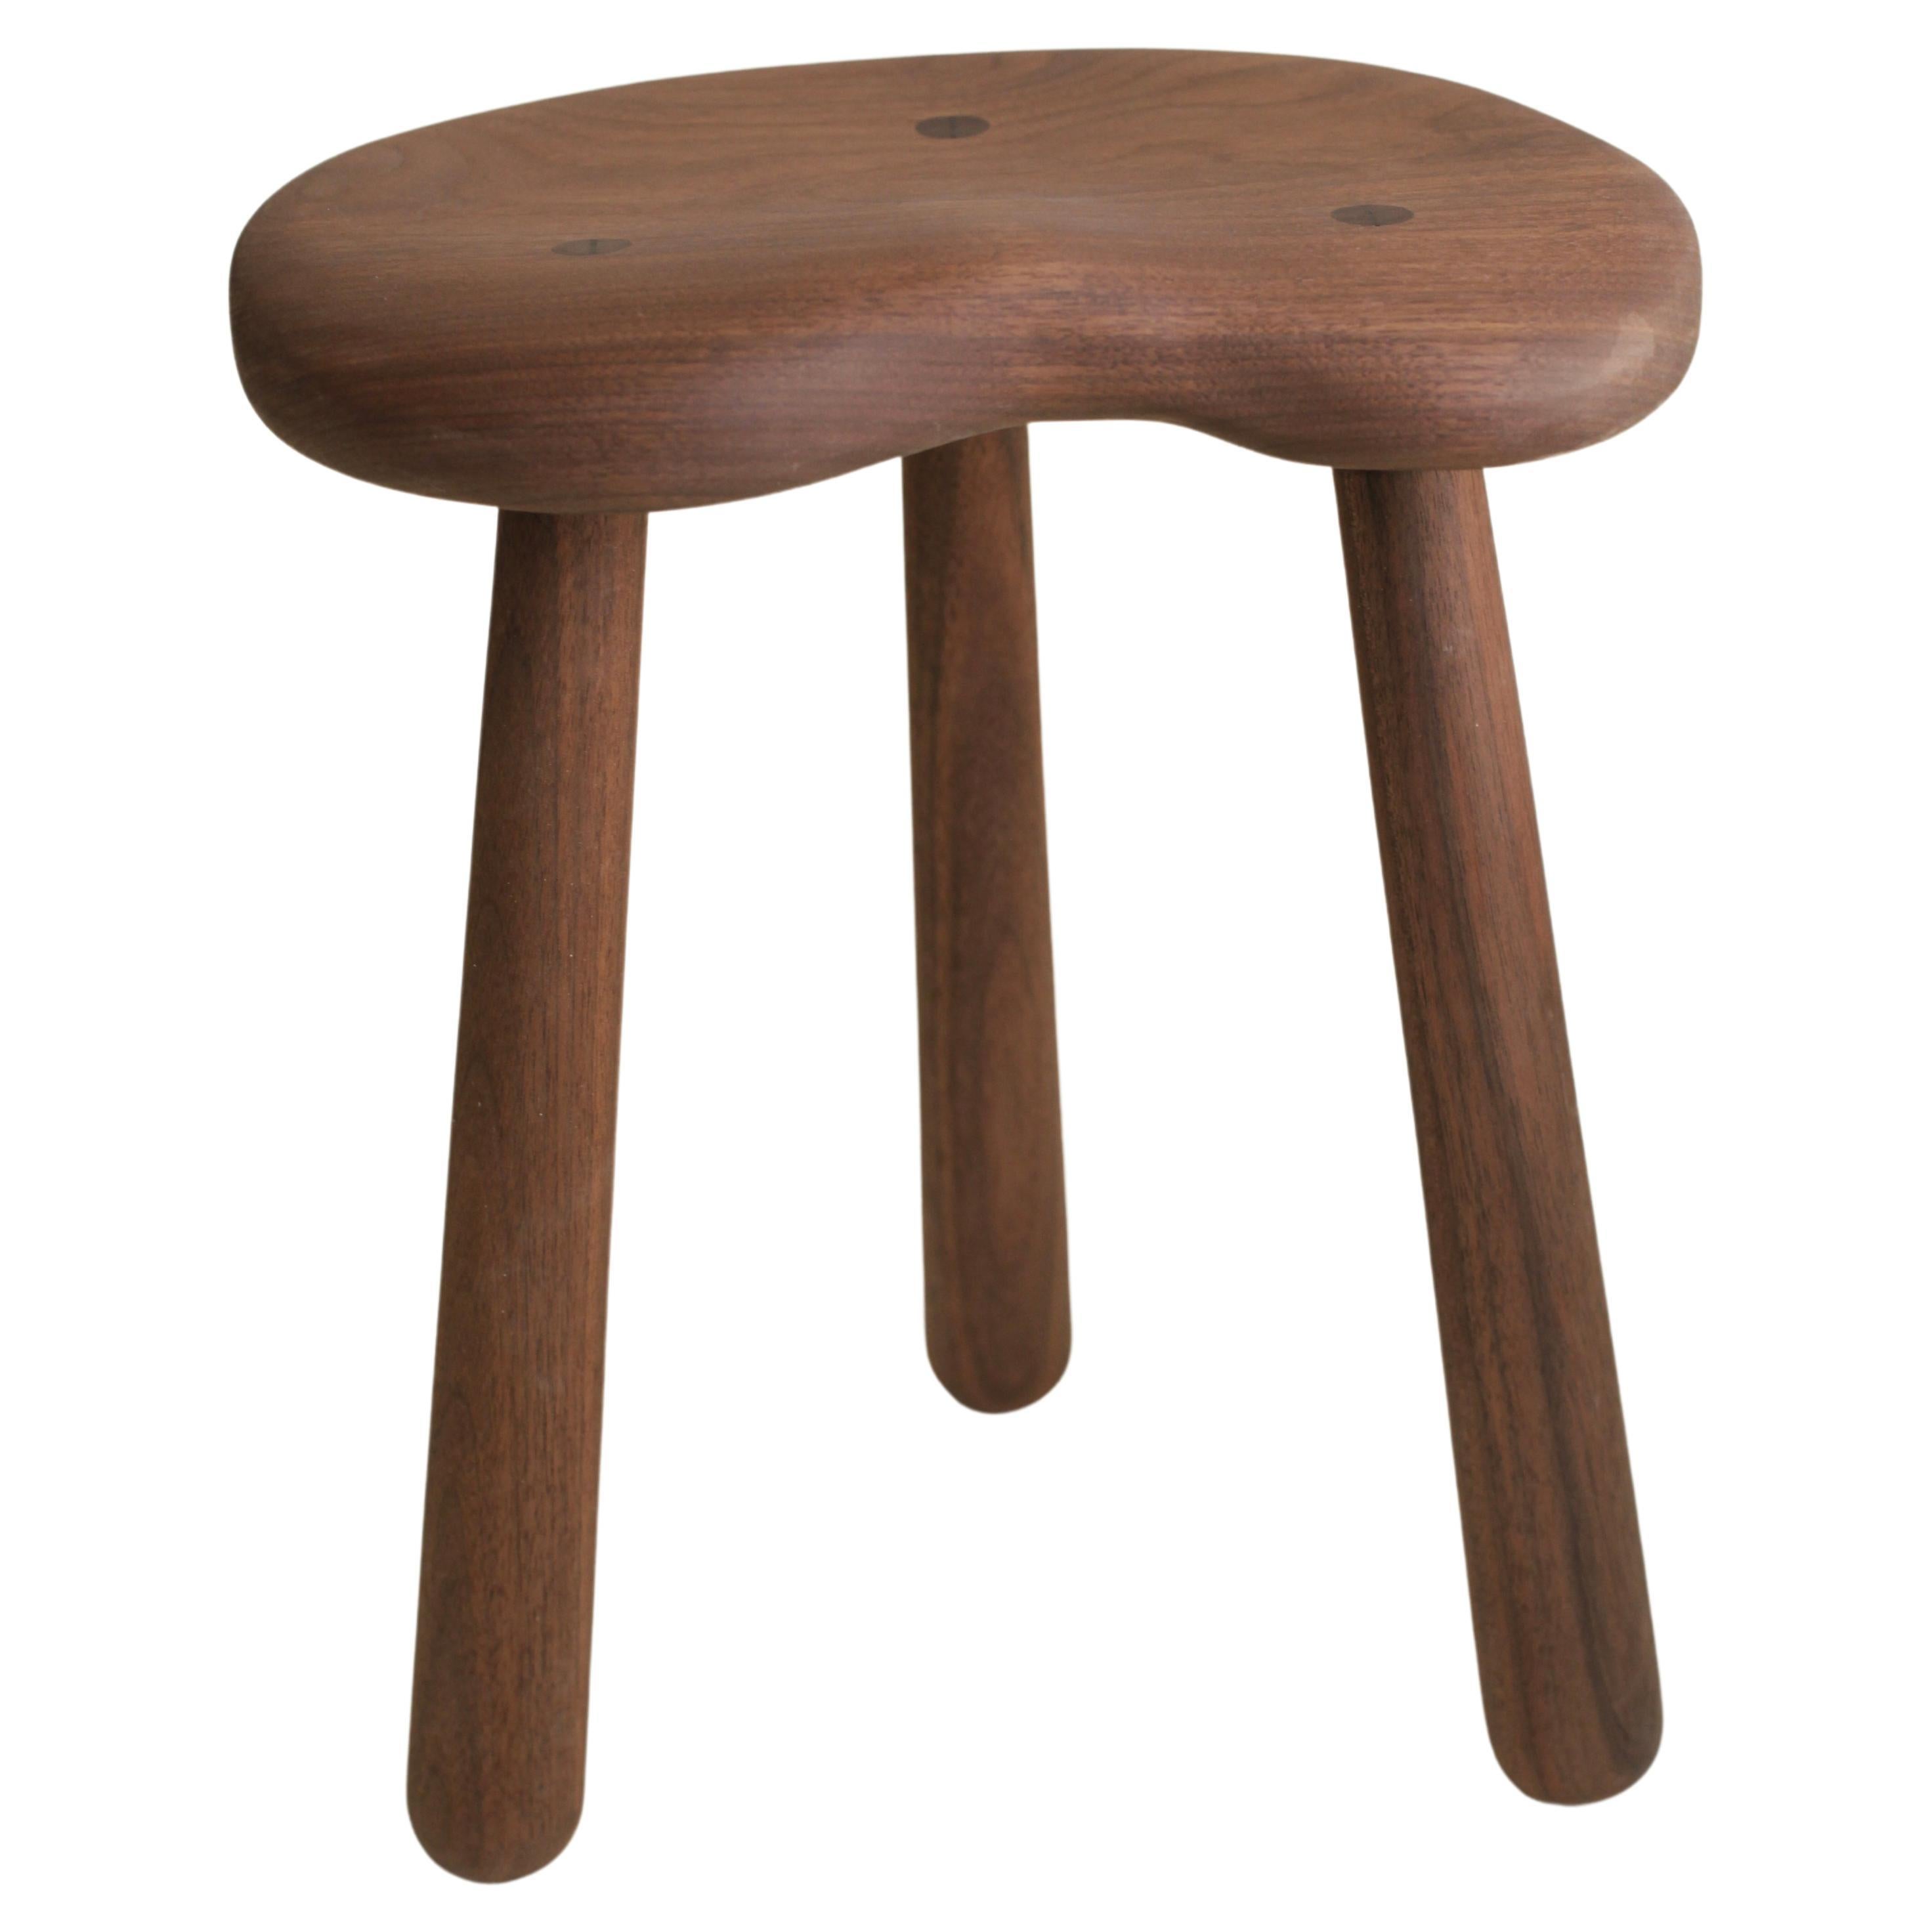 This hand carved stool in walnut with a tractor seat was originally designed for a client who asked for a comfortable stool in their steam shower. It was first made in teak. We liked it so much that we started making it in walnut, as seen above, as